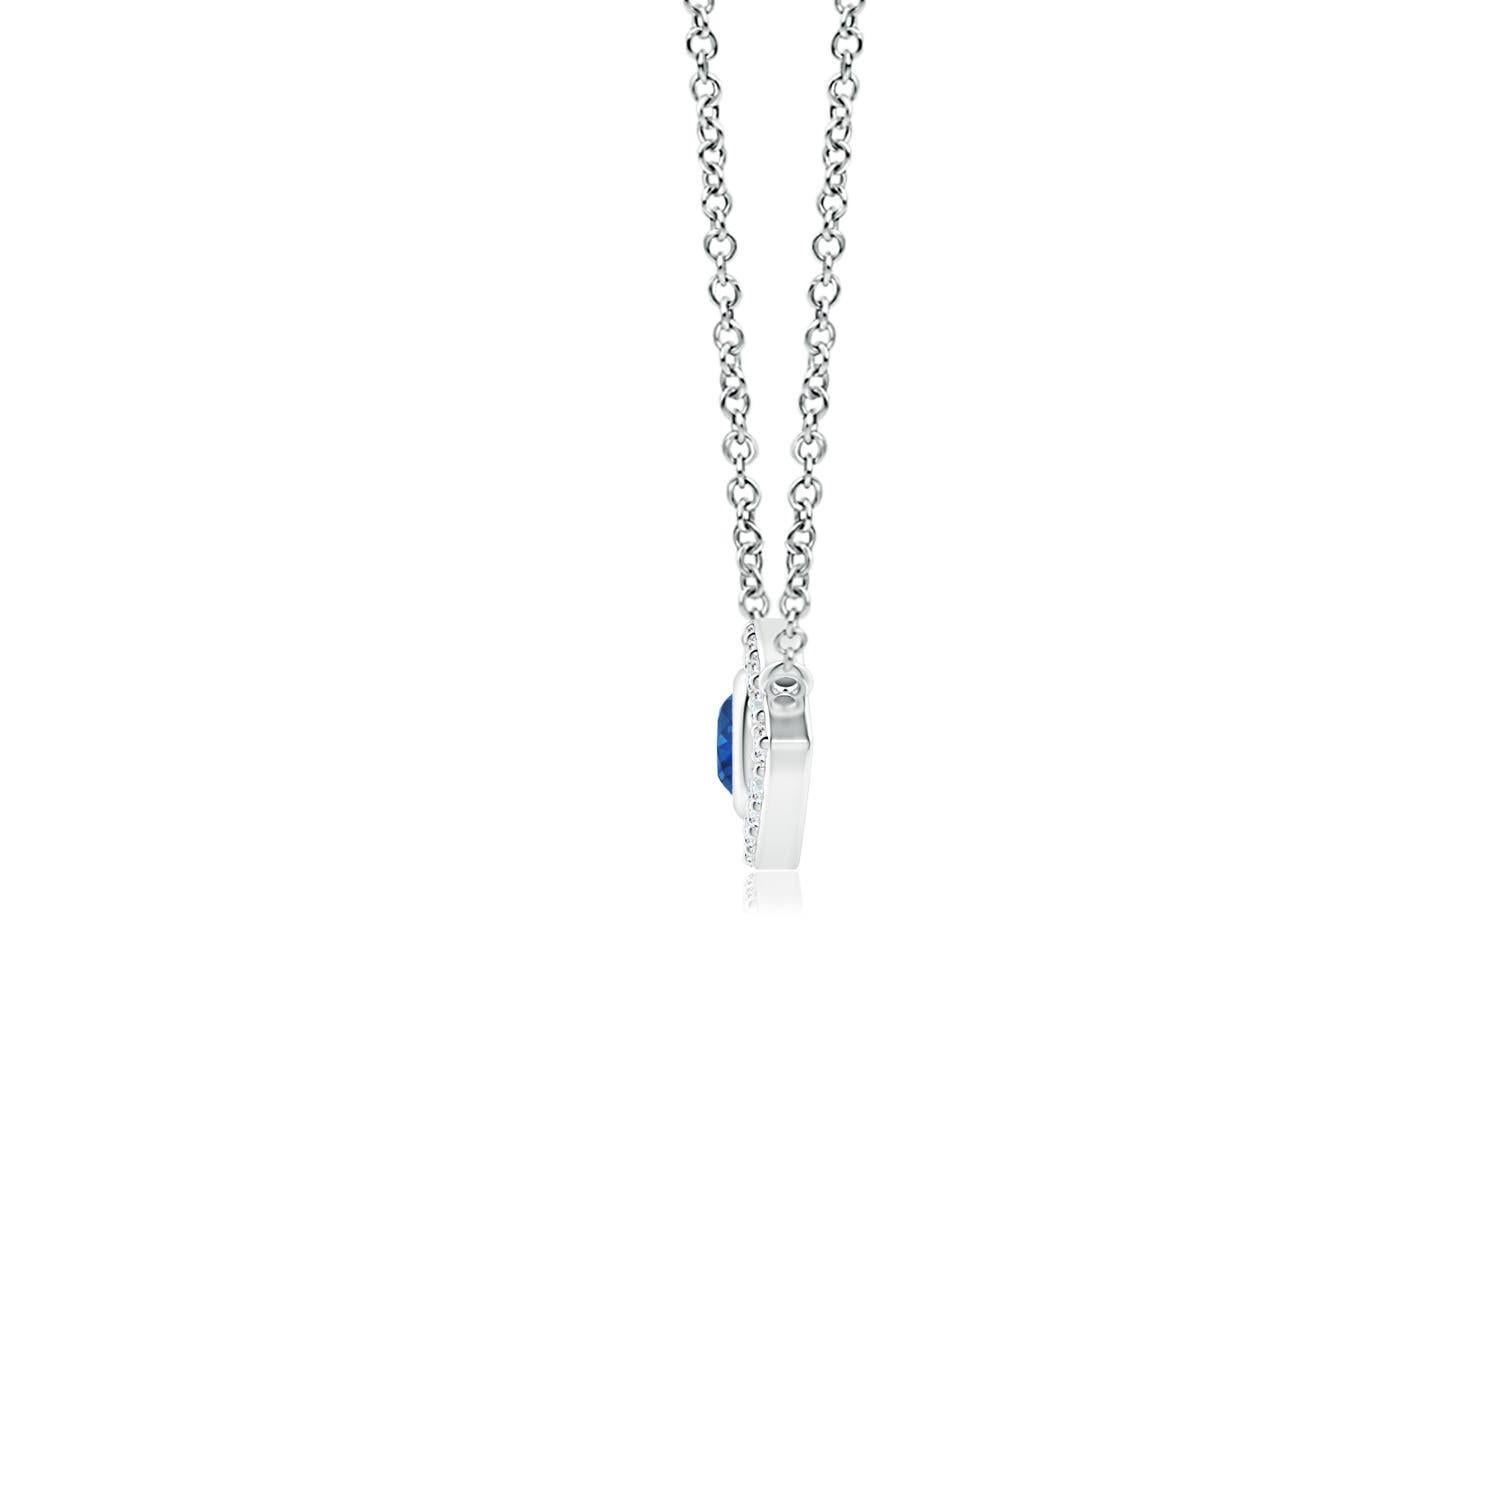 Hanging gracefully from a shiny metal bale is a diamond studded frame with a round sapphire bezel set at the center. The sparkling diamonds create a compelling contrast against the deep blue sapphire. Crafted in 14k white gold, this sapphire evil